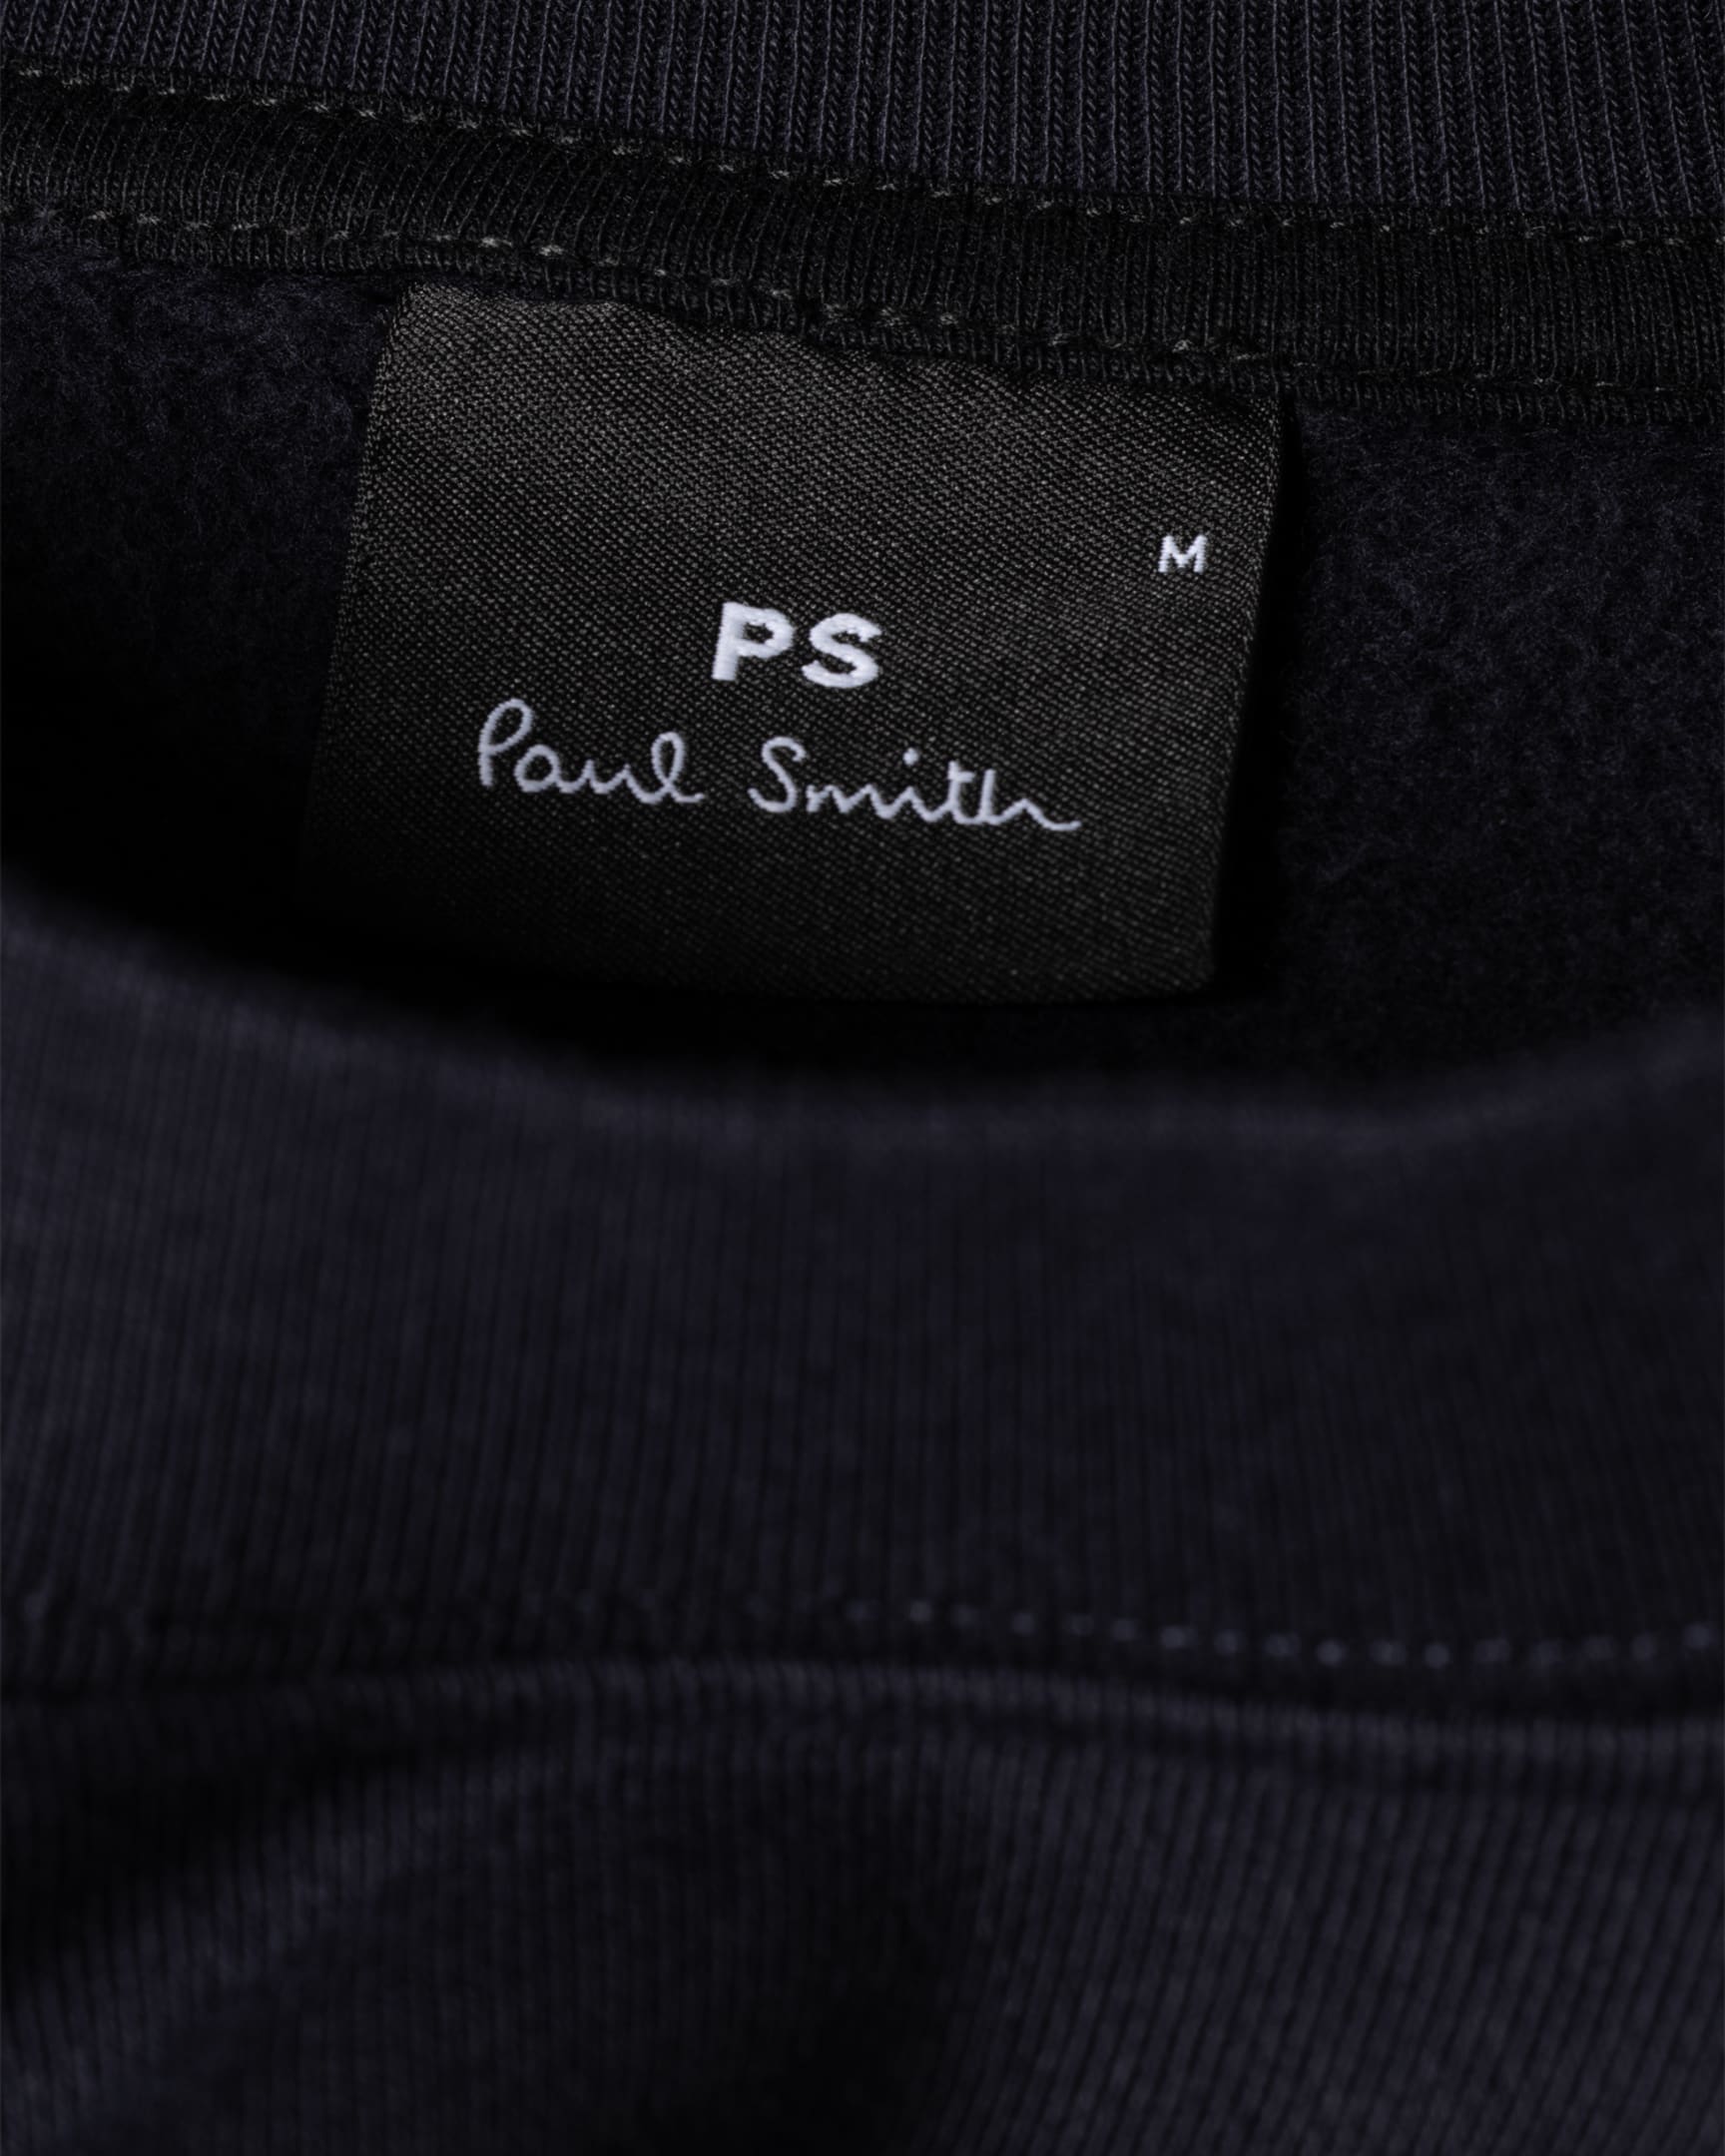 Detail View - Navy Organic Cotton Embroidered PS Logo Sweatshirt Paul Smith